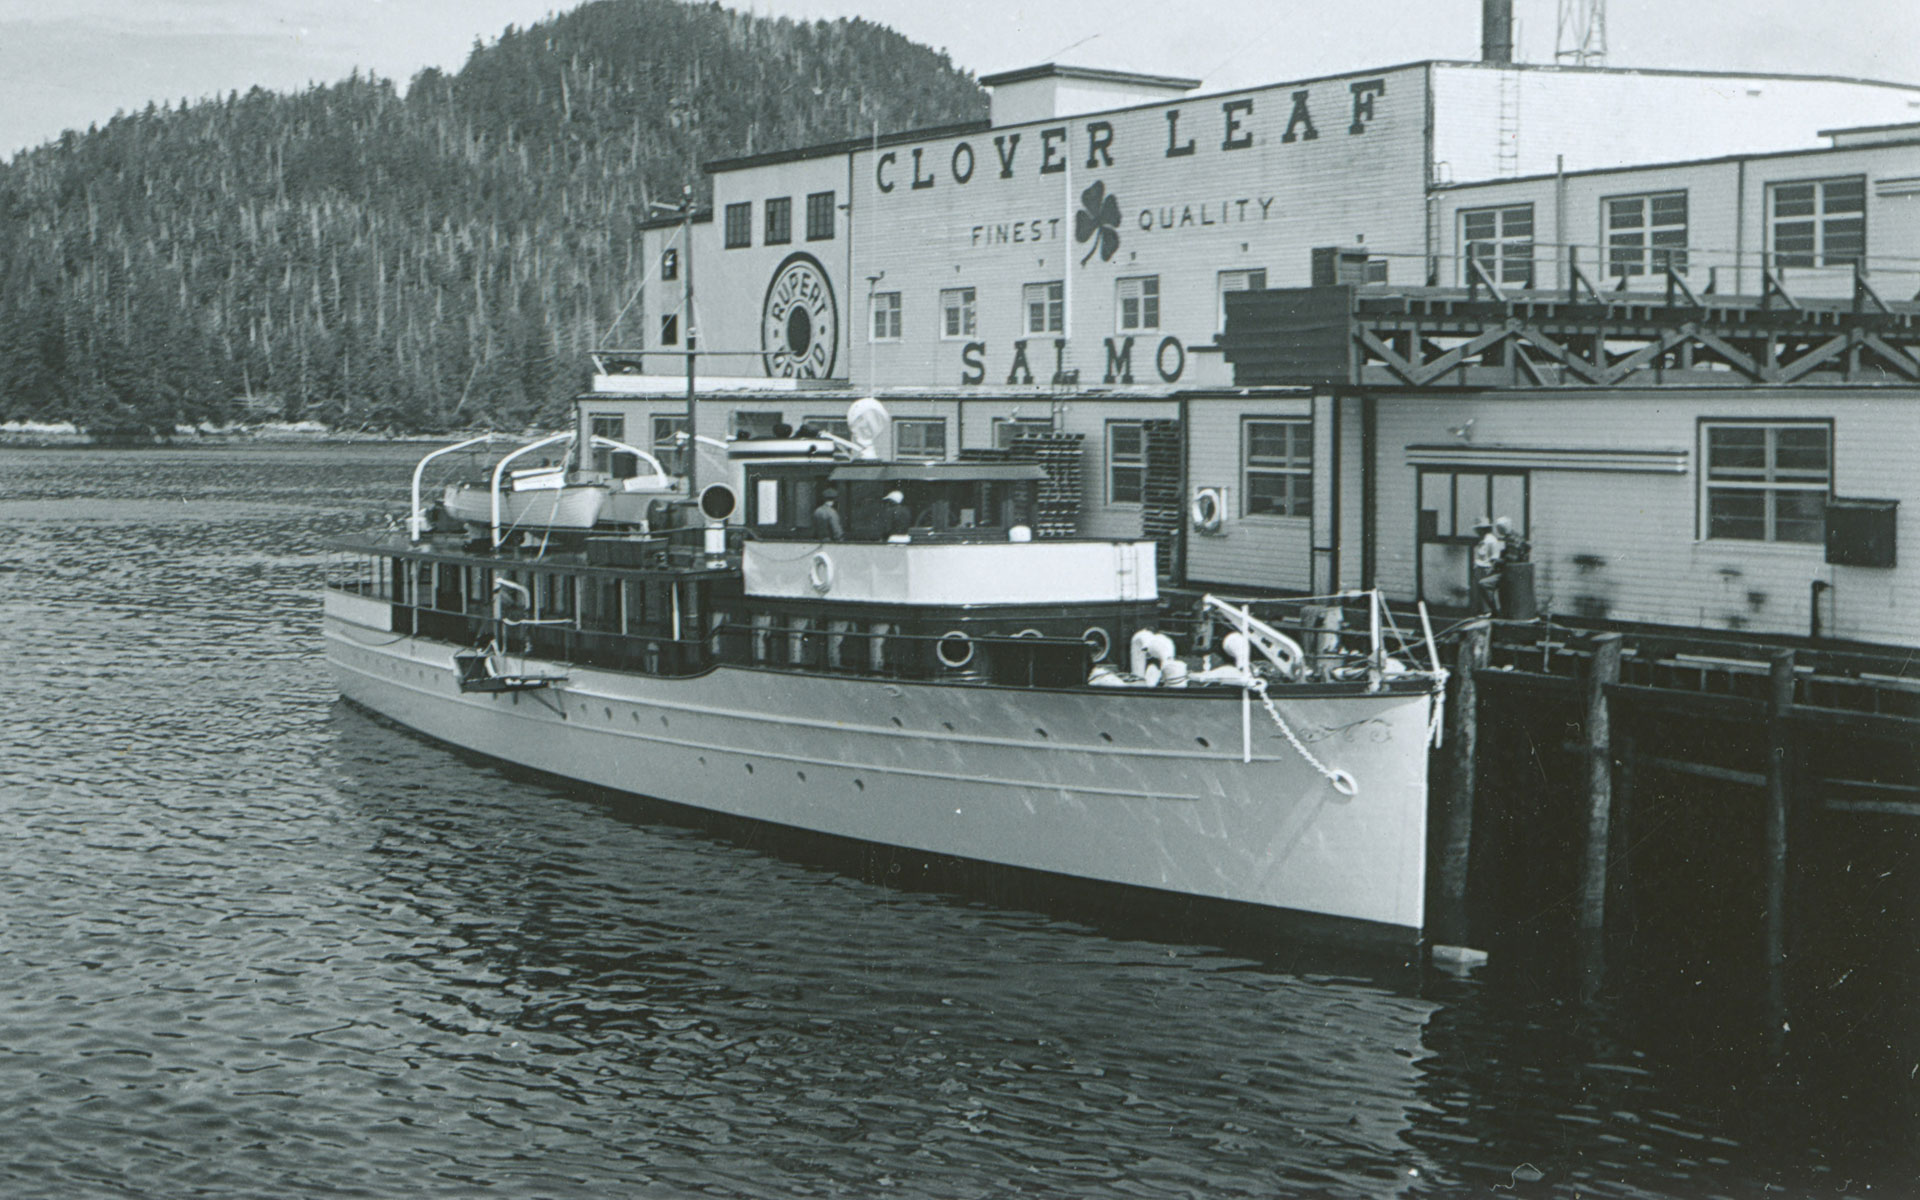 Passenger vessel docked at the Namu cannery. The words "Clover Leaf finest quality salmon" and "Rupert Brand" are painted on the side of the cannery building.